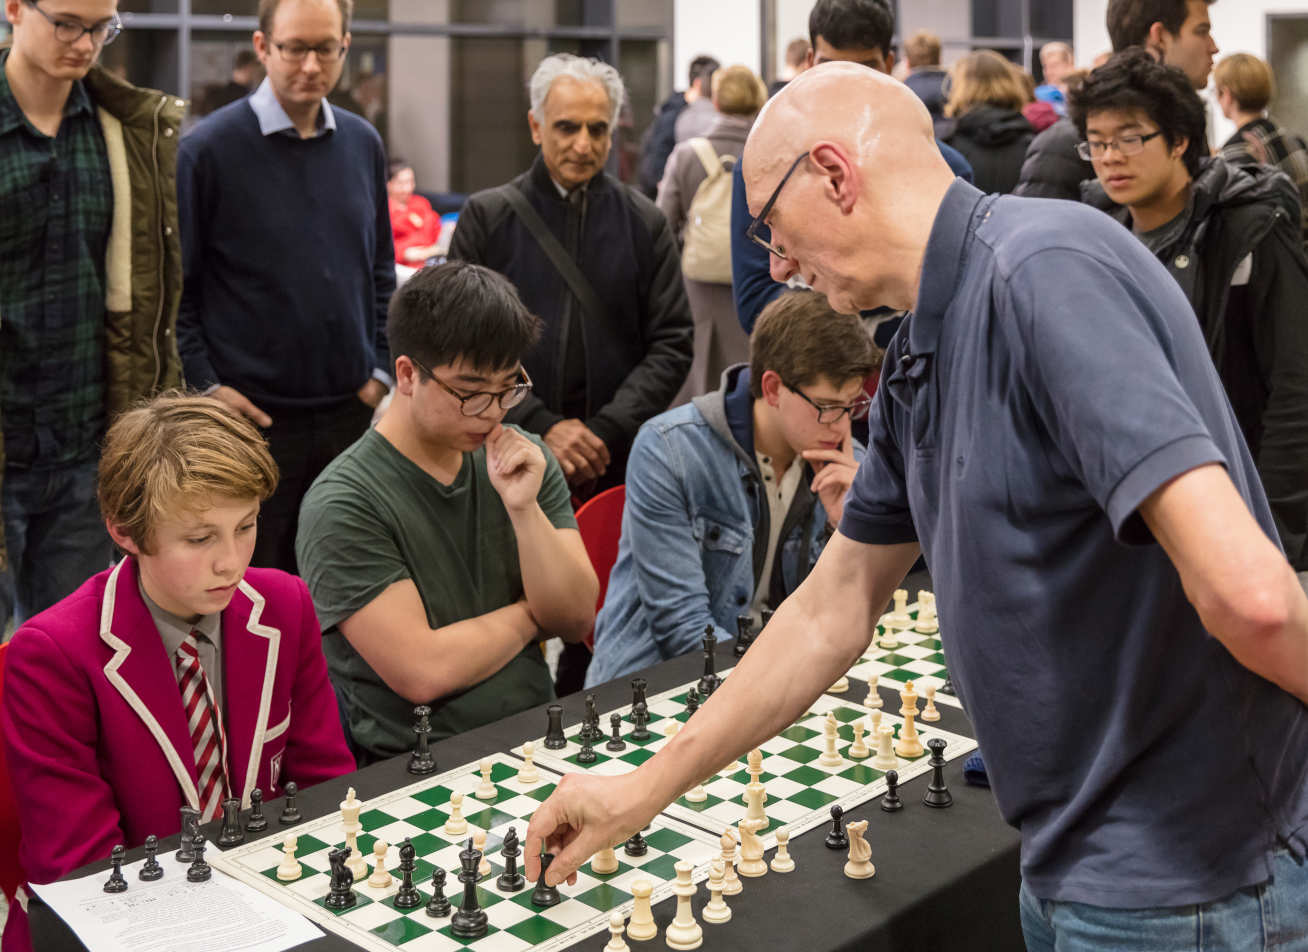 Jonathan Mestel challenges visitors to chess